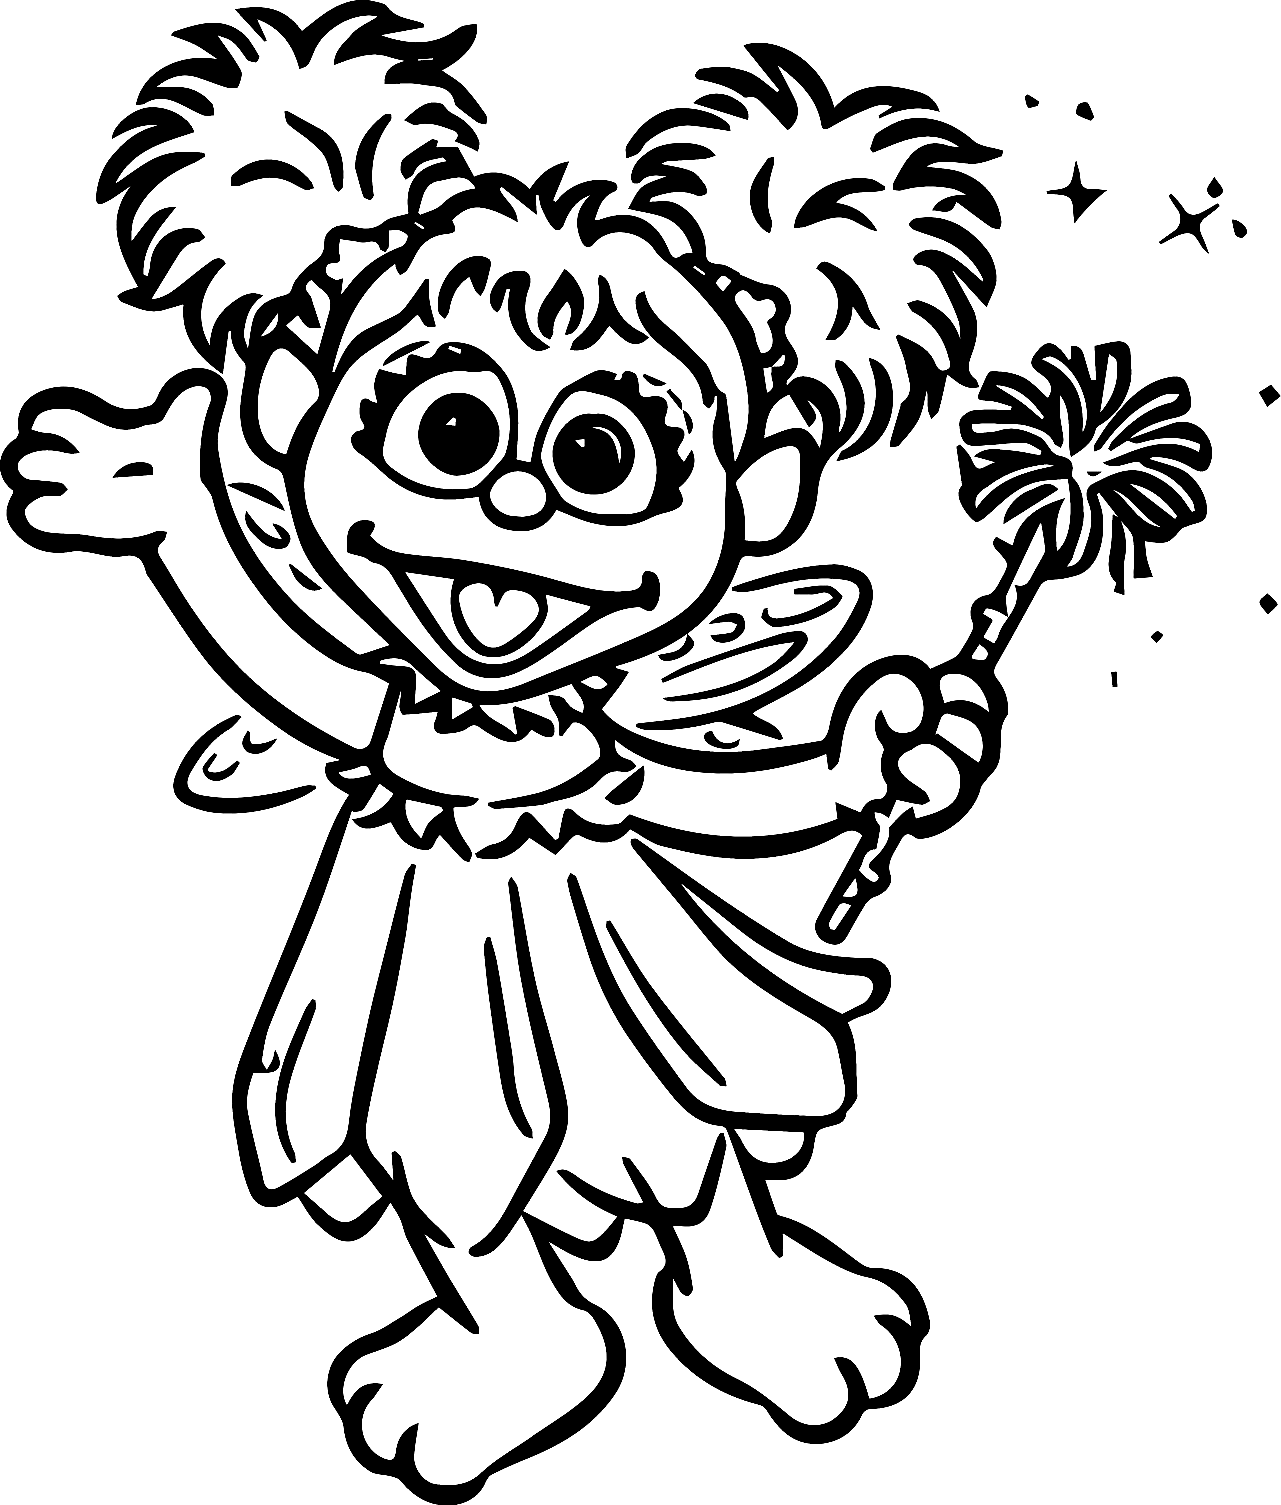 Abby Cadabby Coloring Page